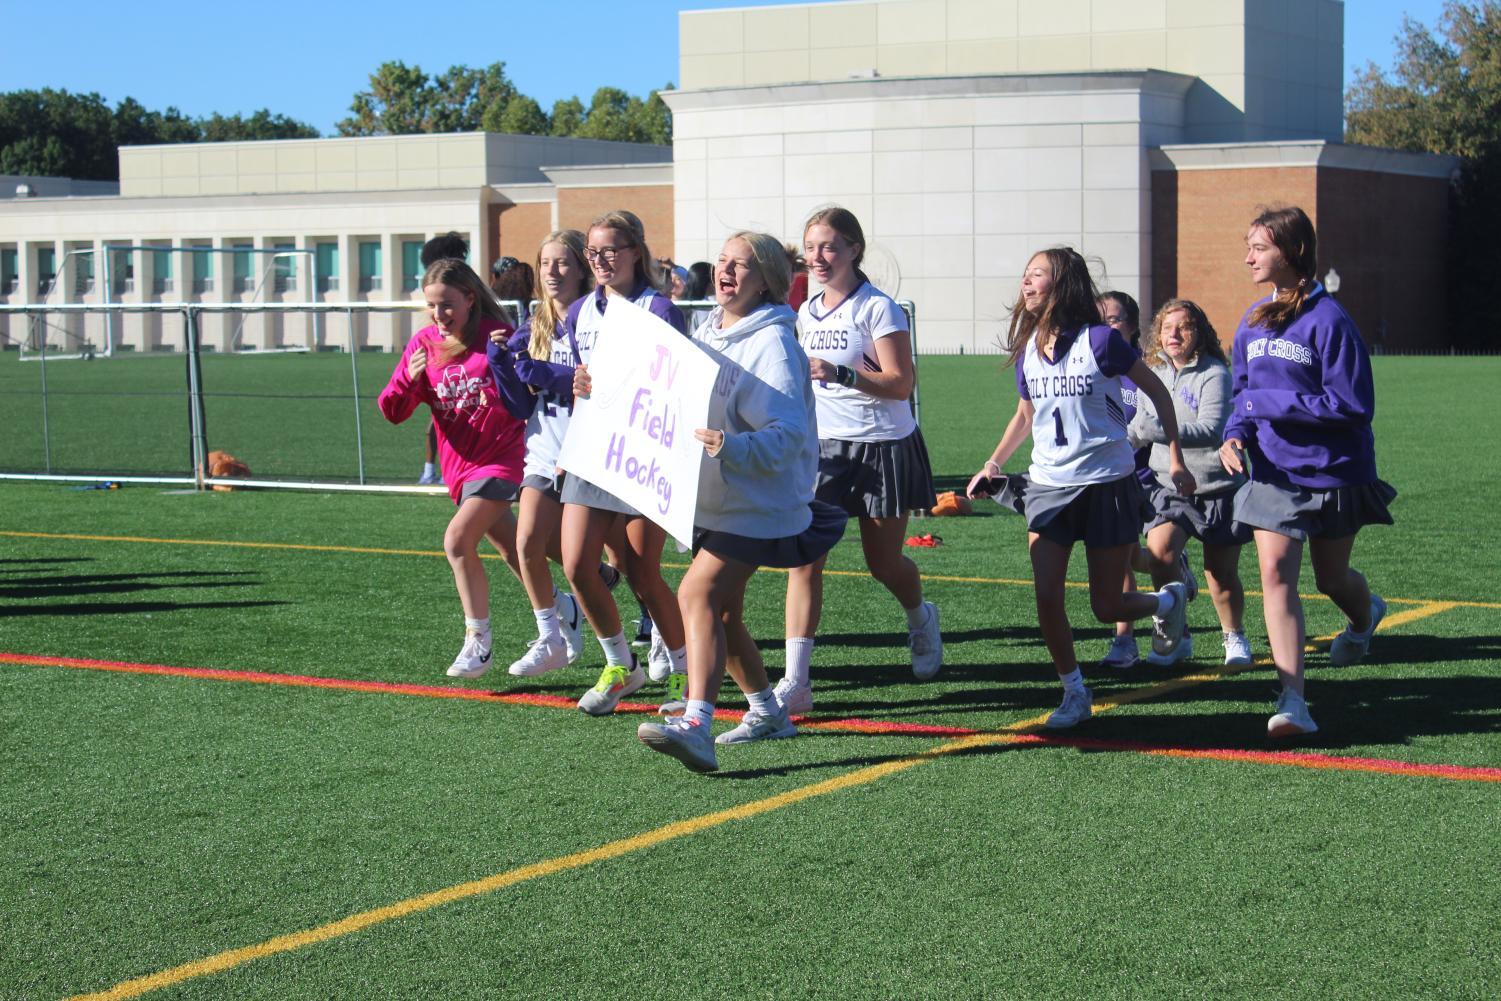 The JV field hockey team makes their entrance onto the field during the pep rally.